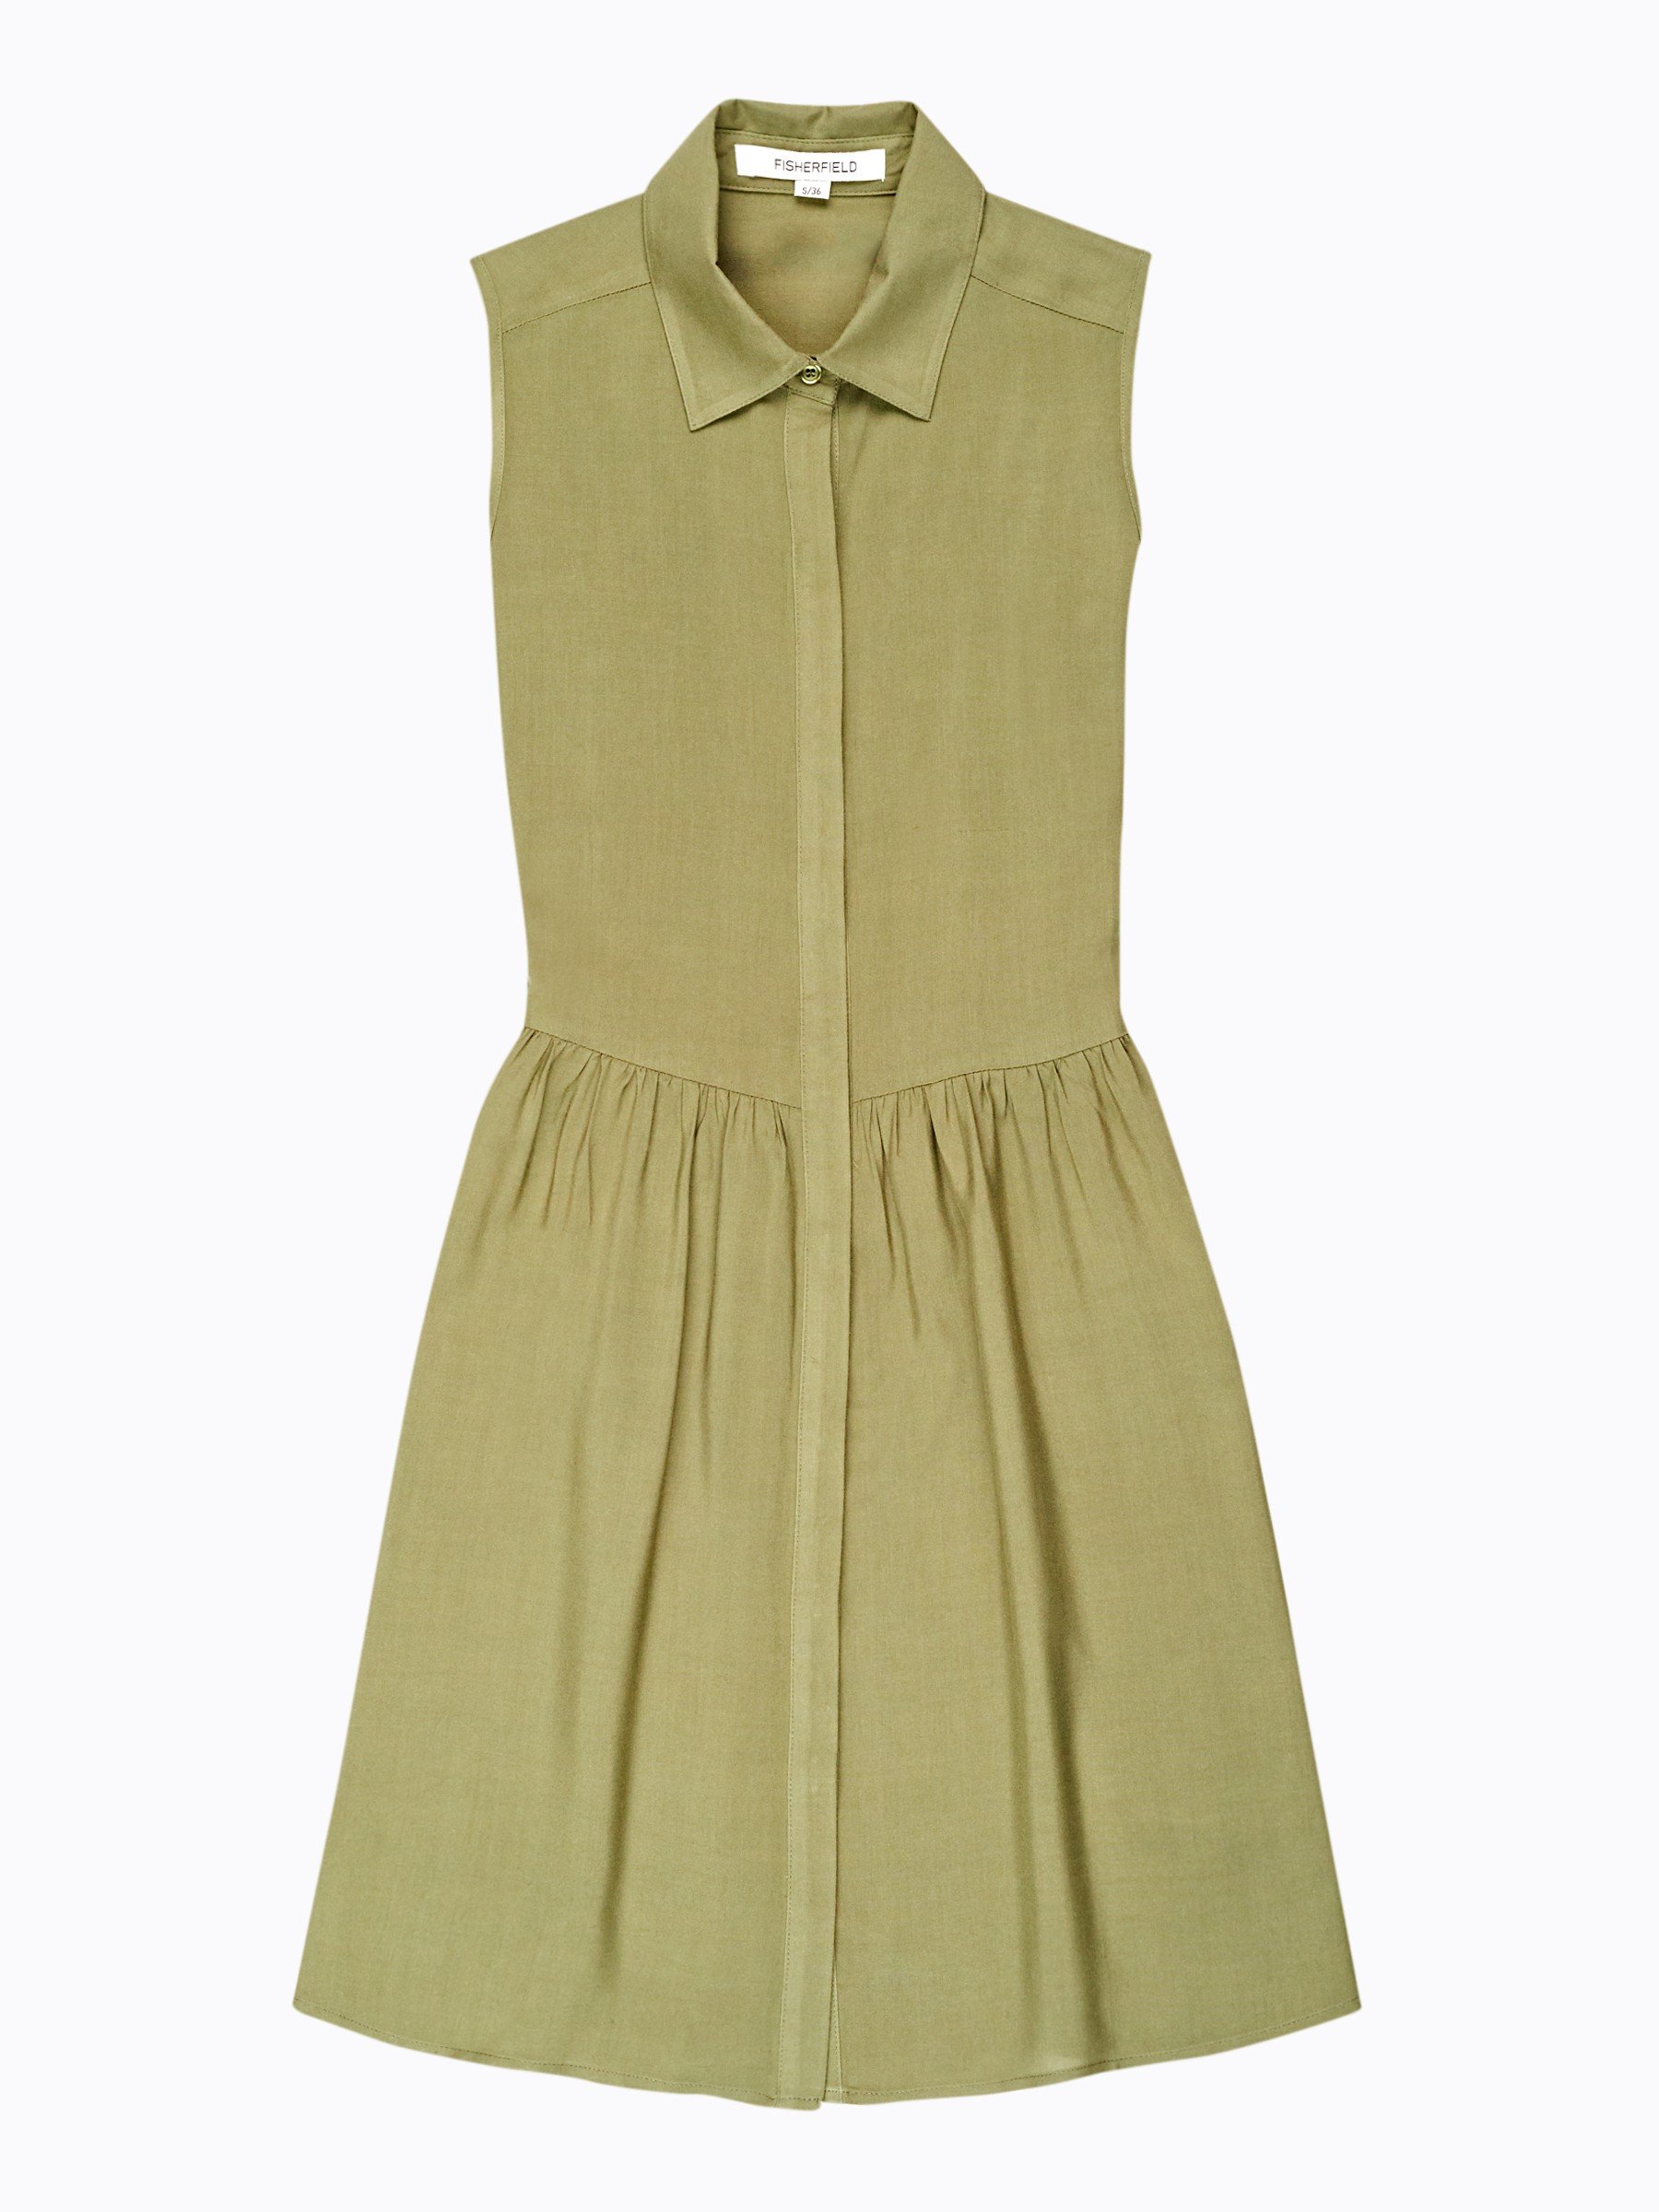 Buy > sleeveless shirt dress with collar > in stock